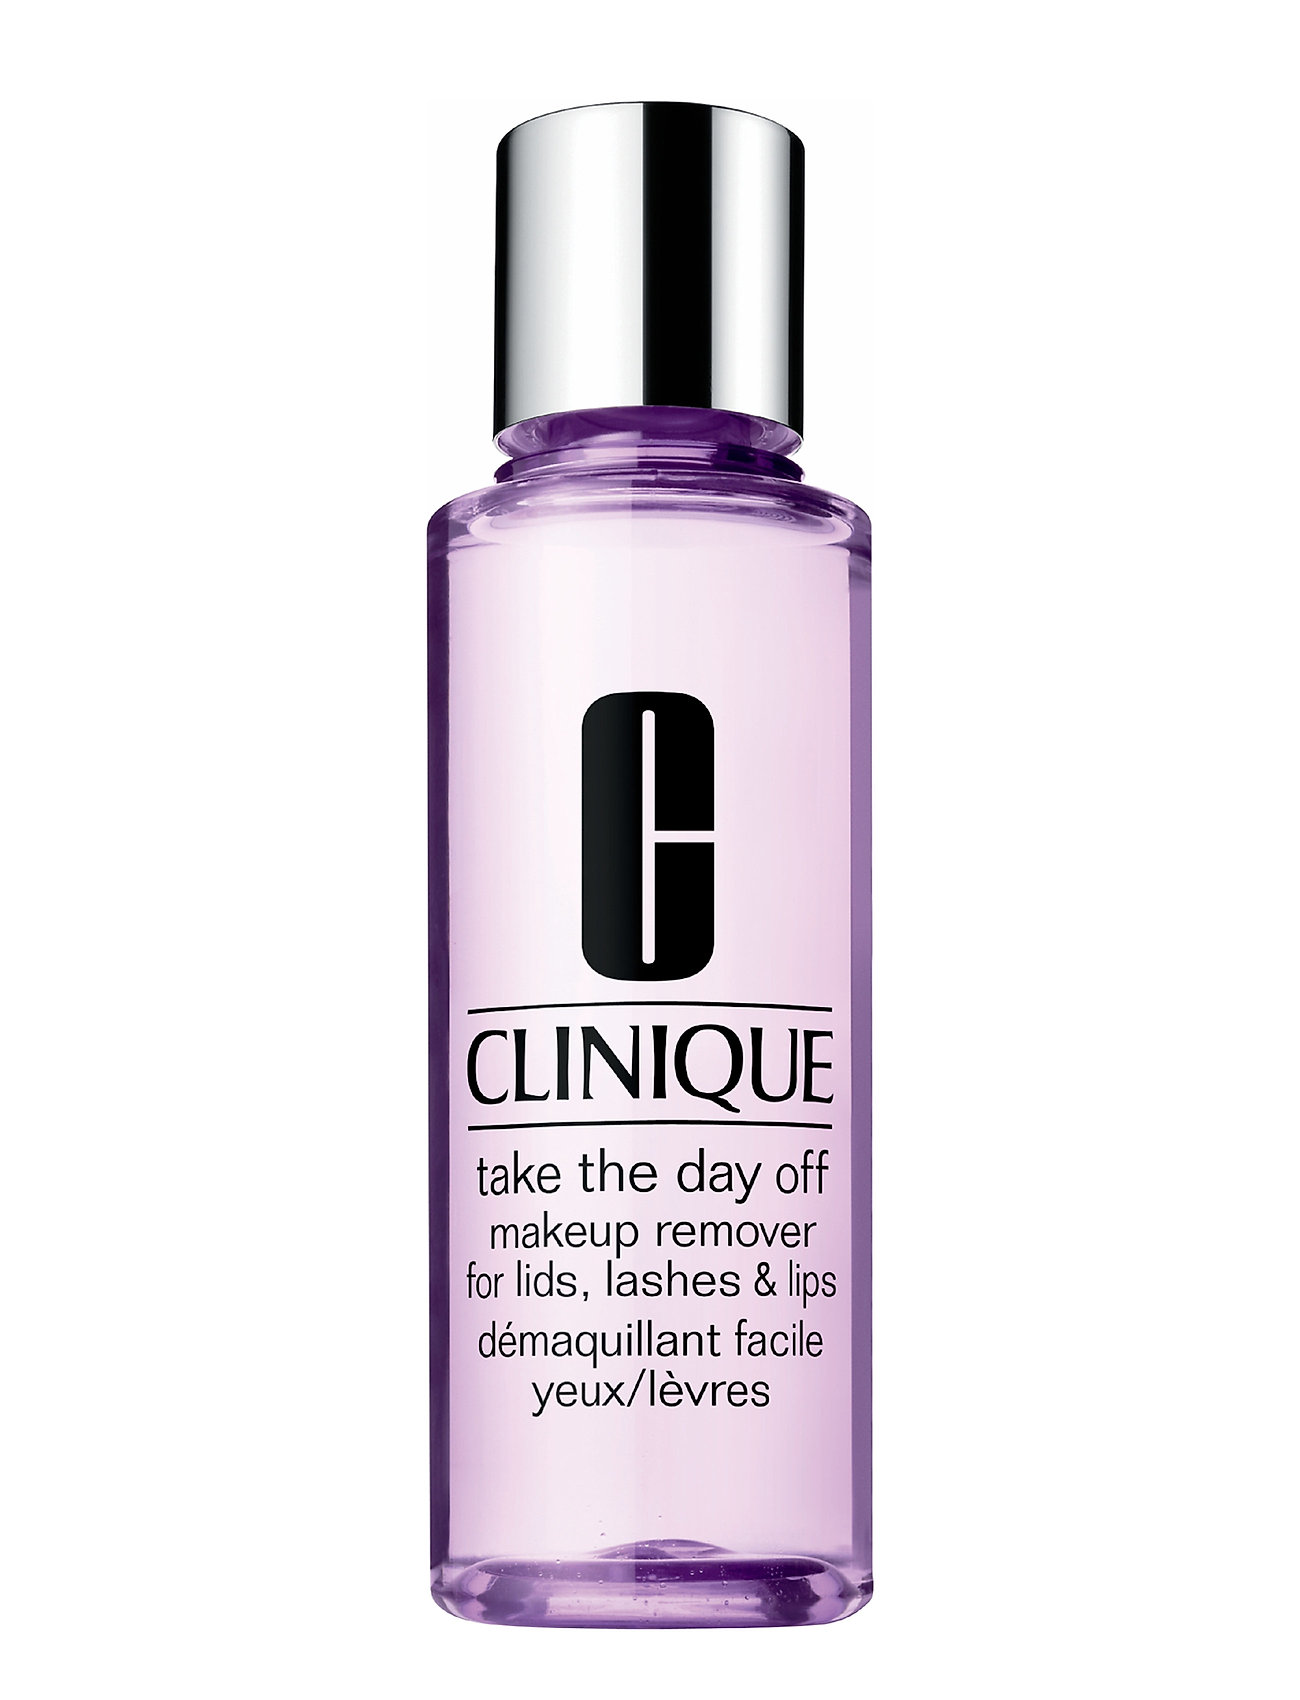 Take The Day Off Makeup Remover For Lids, Lashes & Lips Beauty Women Skin Care Face Cleansers Eye Makeup Removers Nude Clinique